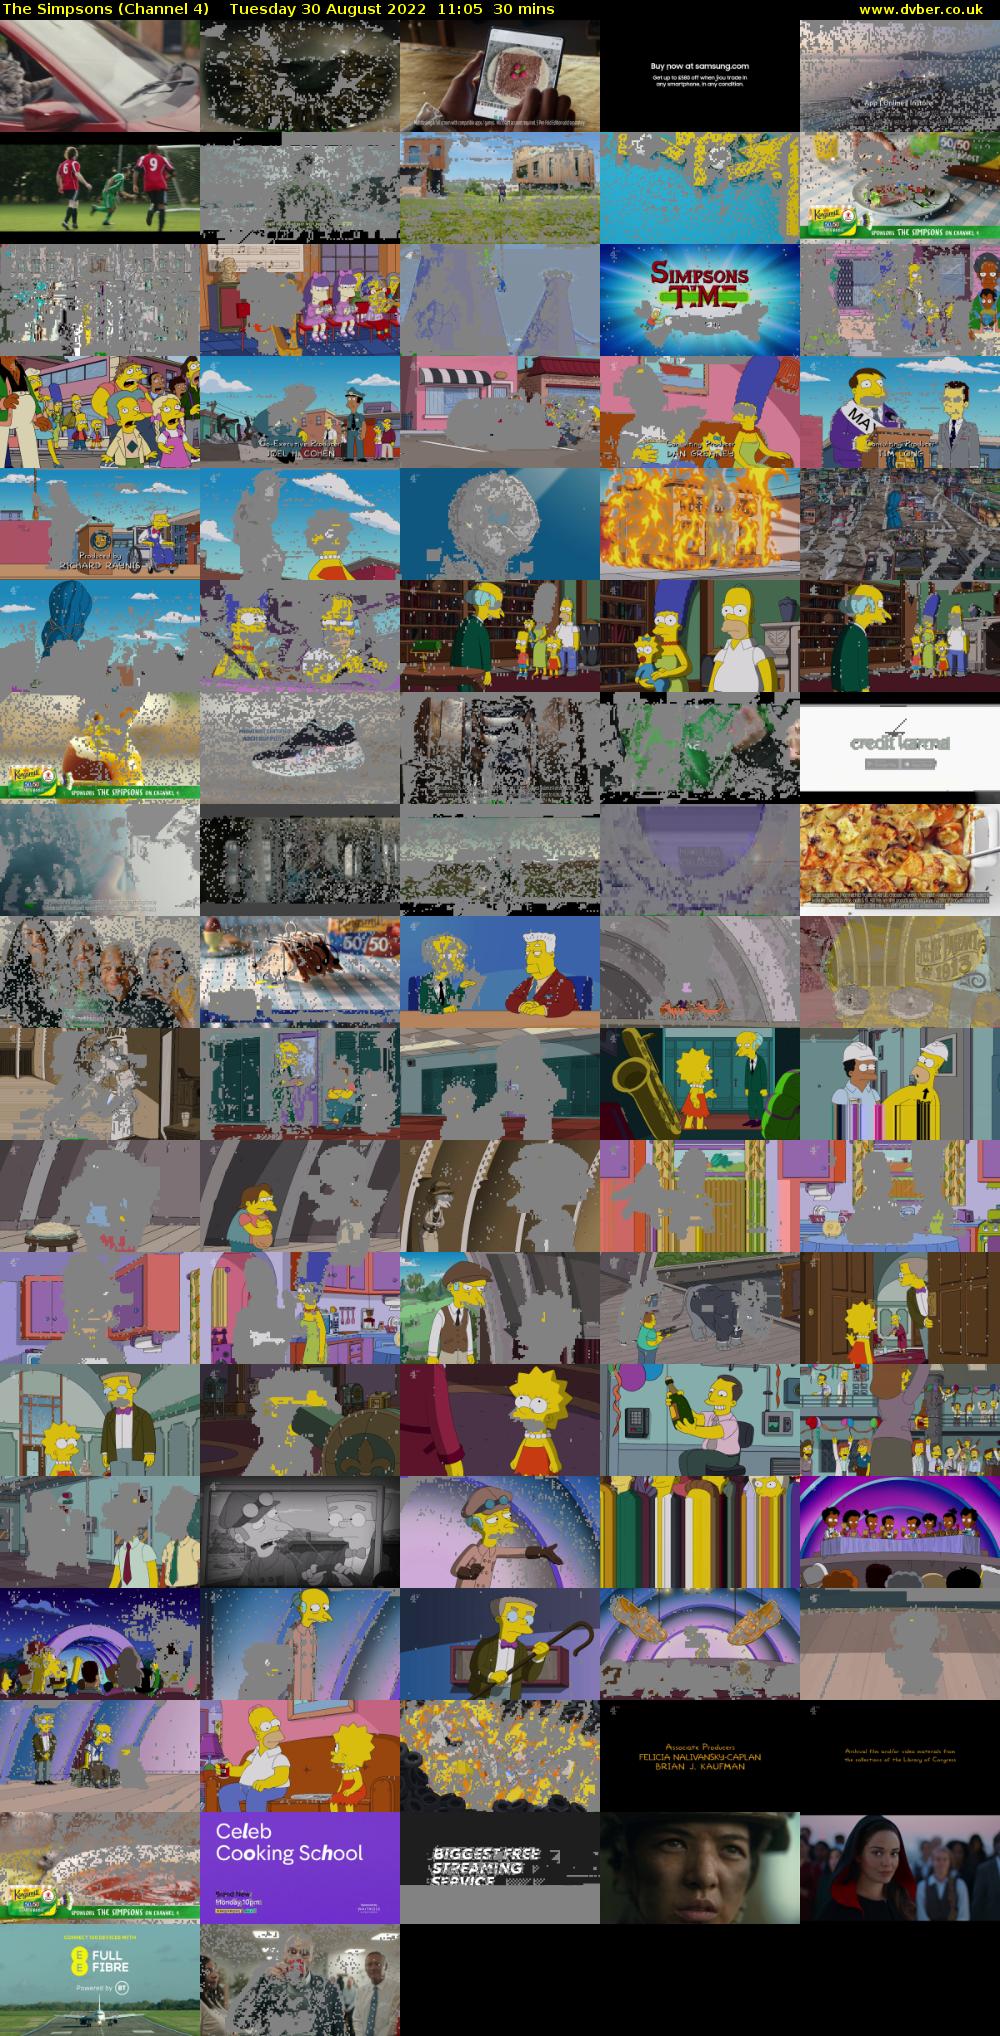 The Simpsons (Channel 4) Tuesday 30 August 2022 11:05 - 11:35